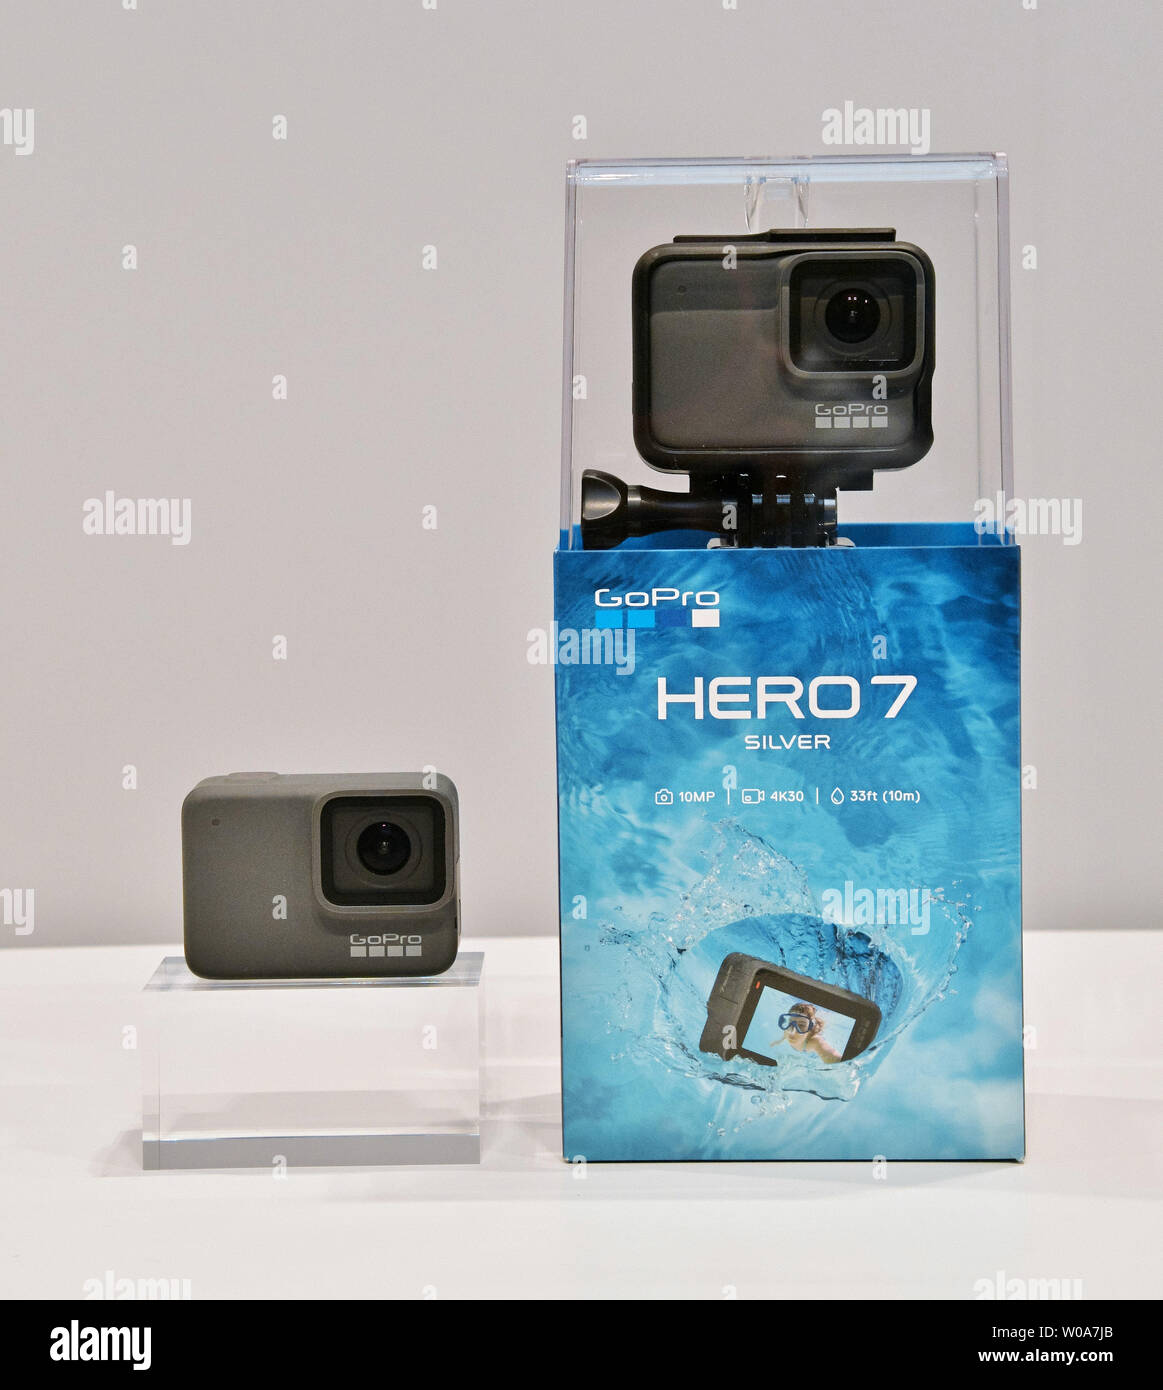 Gopro New Hero 7 Silver Displayed At The Press Conference For New Hero 7 In Tokyo Japan On September 25 18 Photo By Keizo Mori Upi Stock Photo Alamy